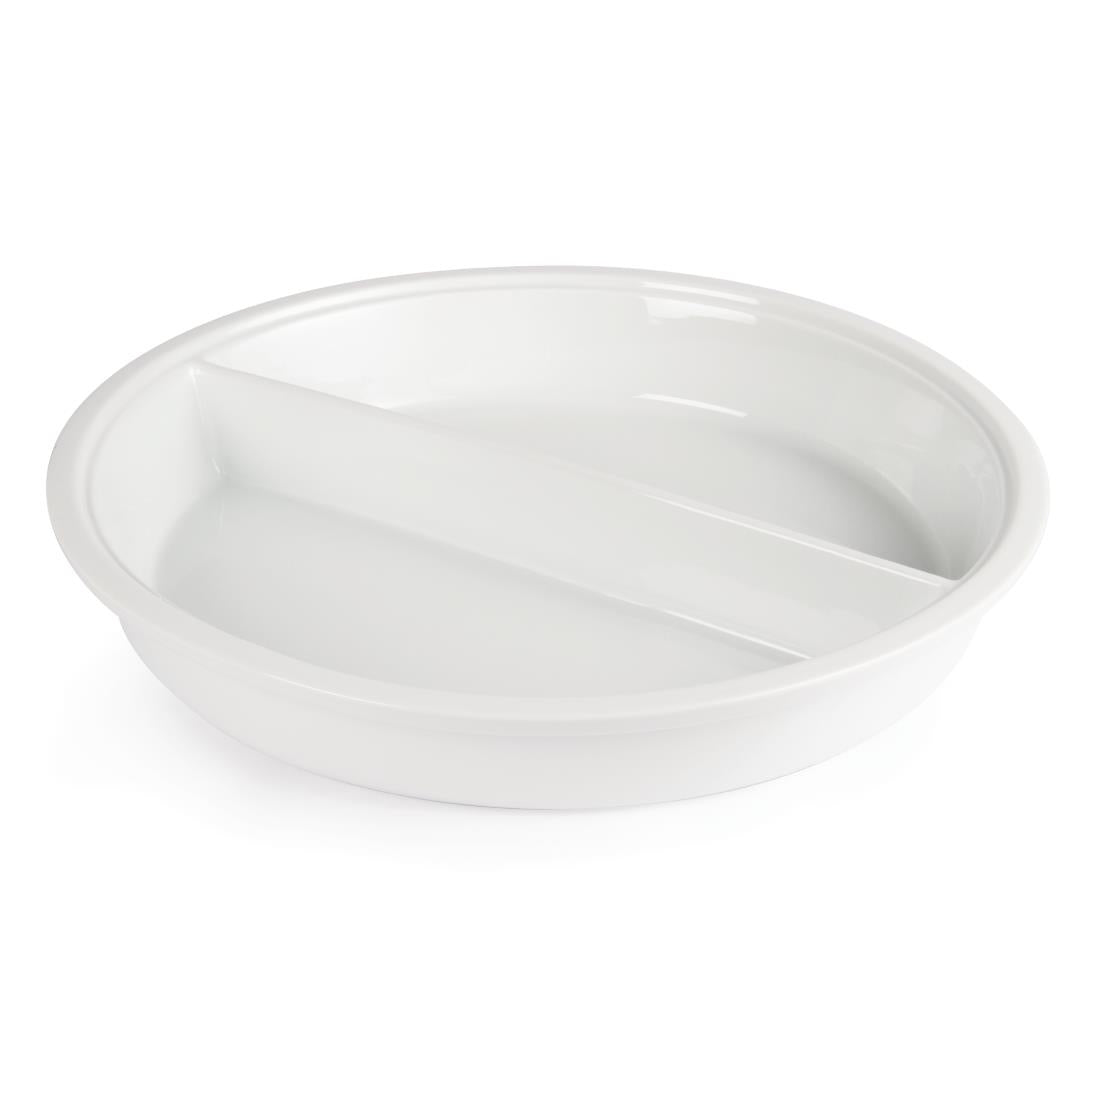 CD711 Olympia Divided Round Dish 3.5Ltr 123.1oz